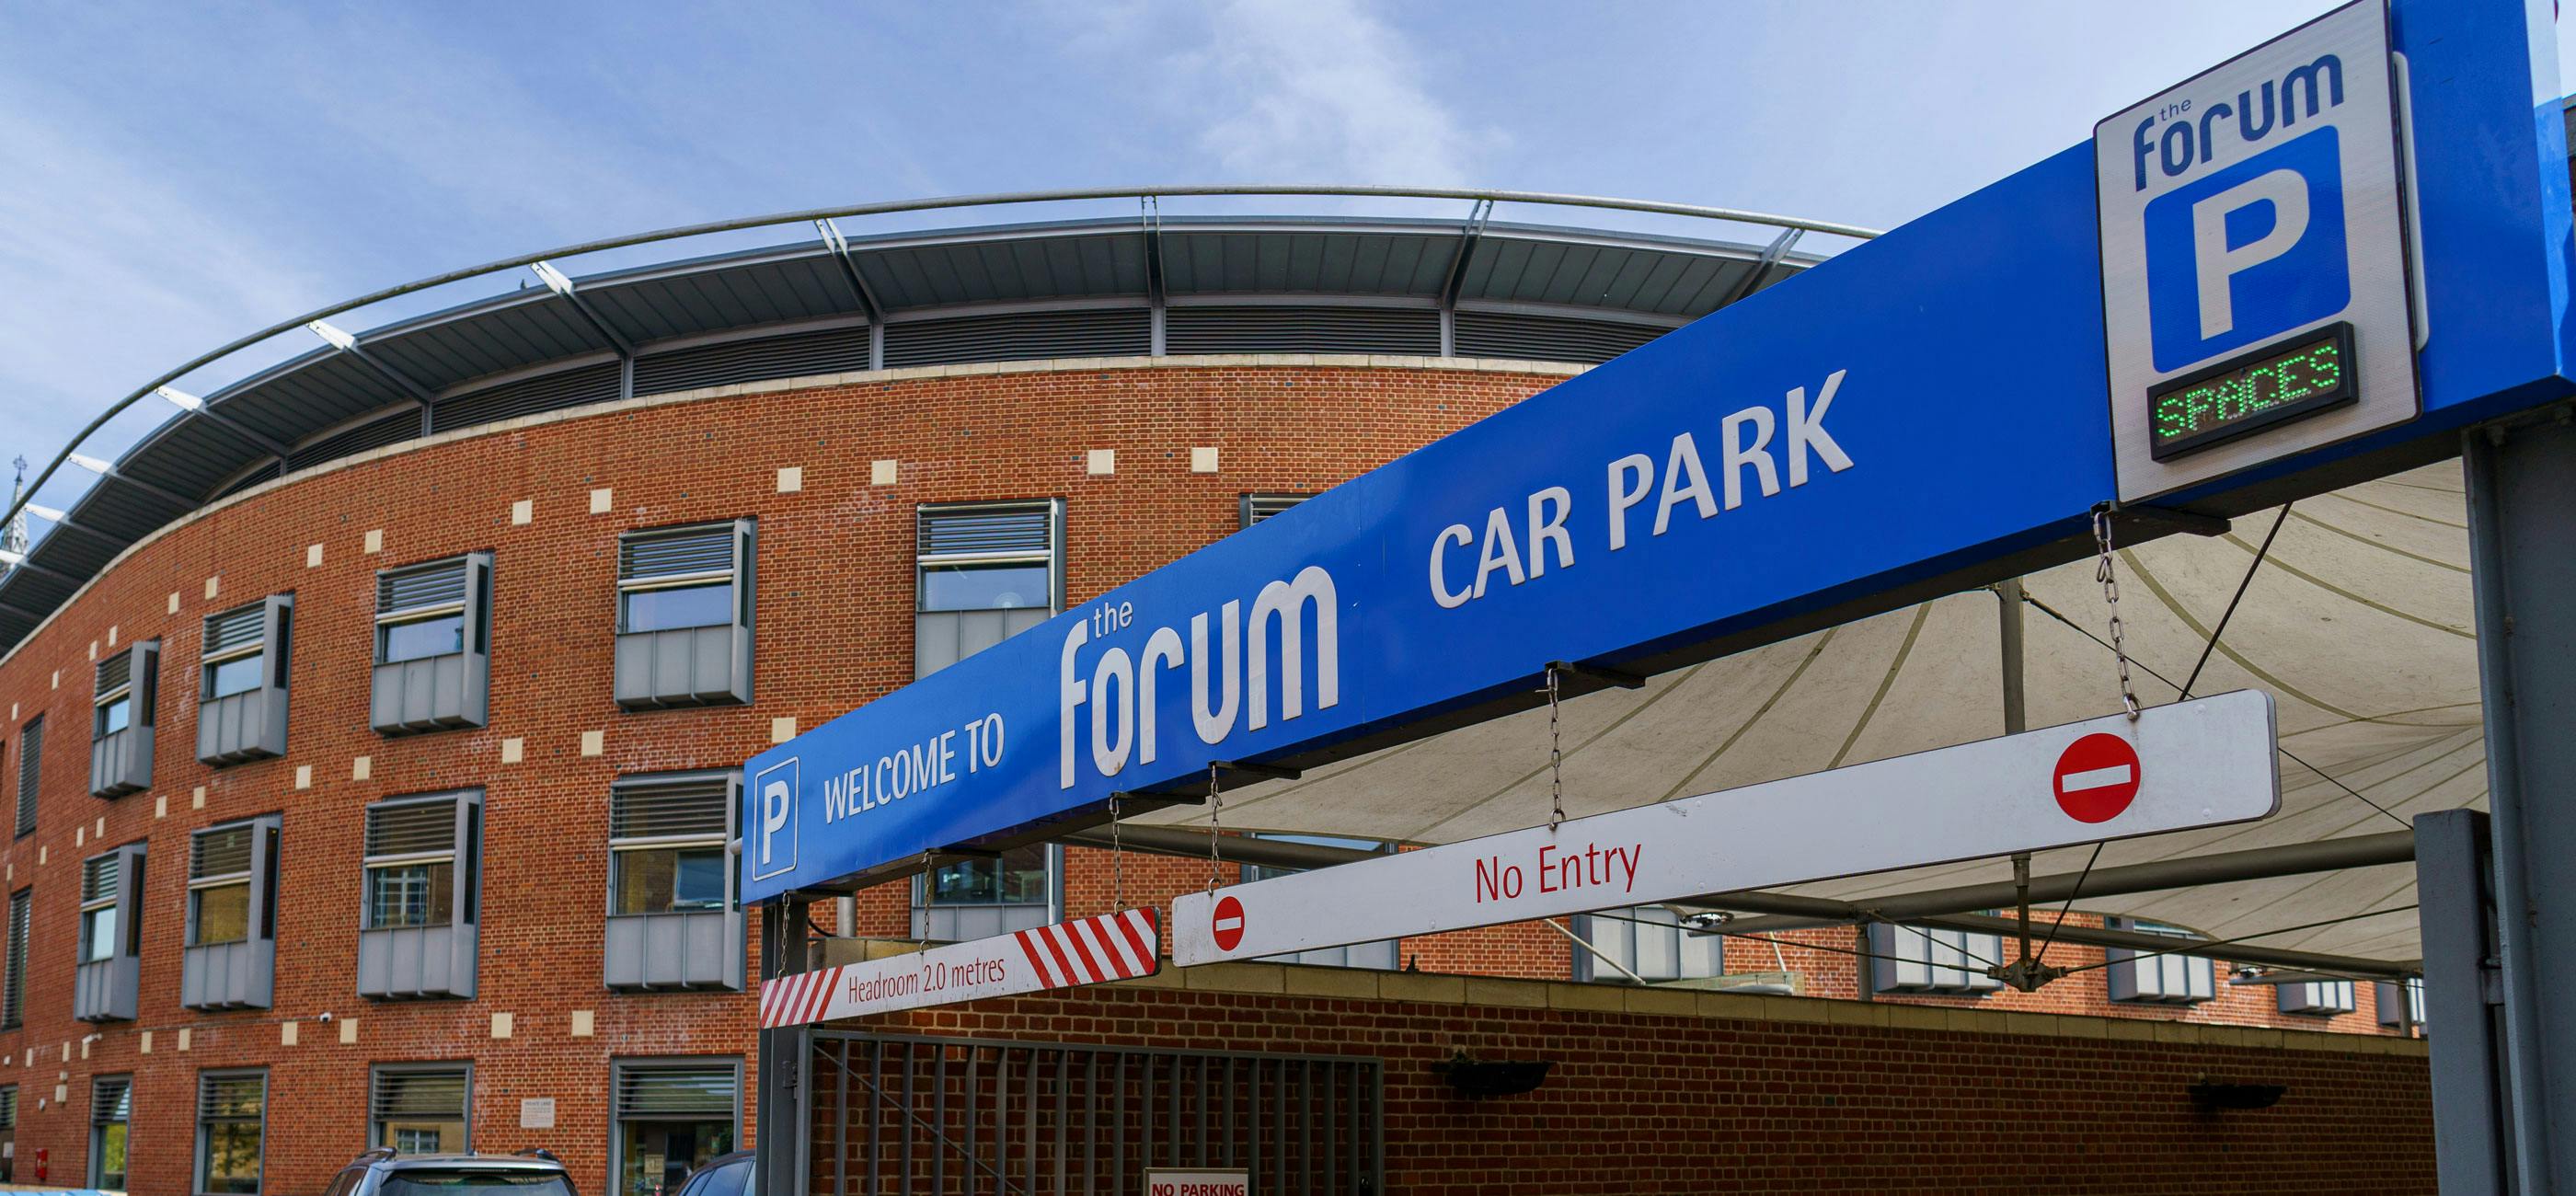 Blue car park entrance sign with The Forum building in the background.